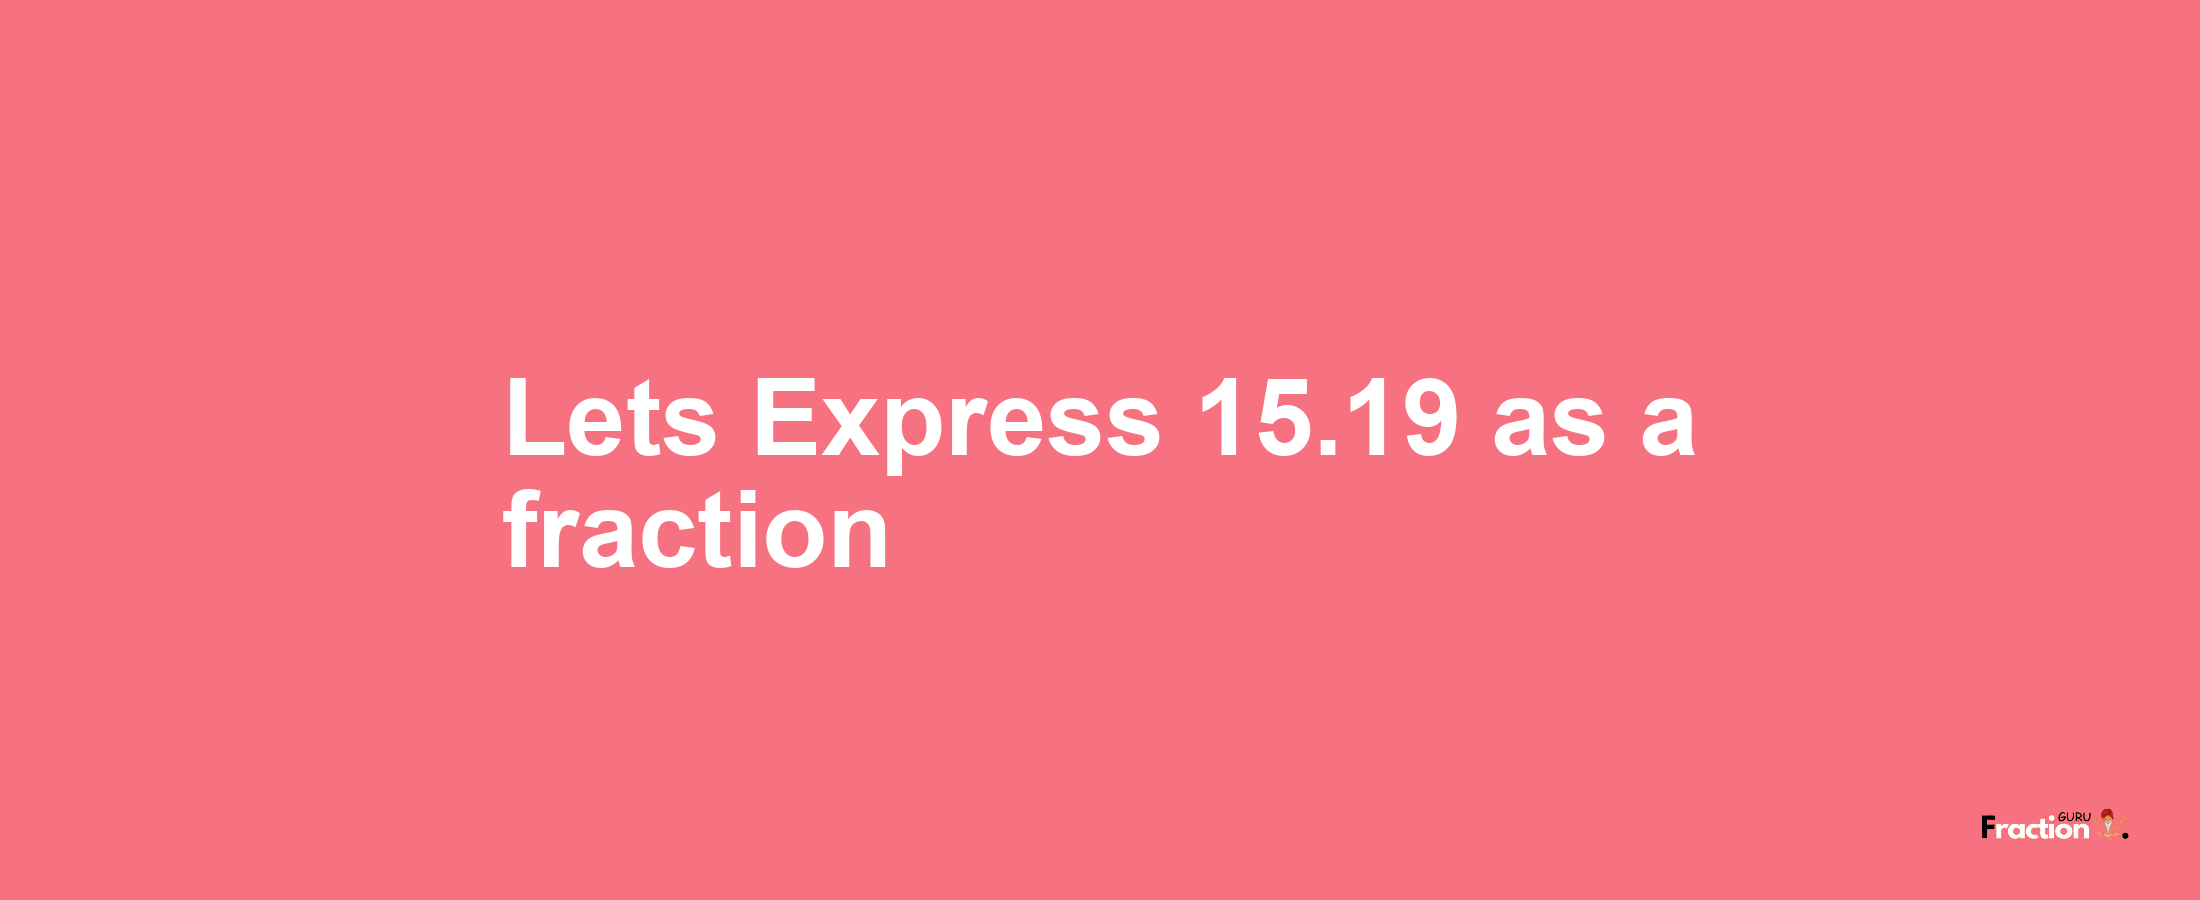 Lets Express 15.19 as afraction